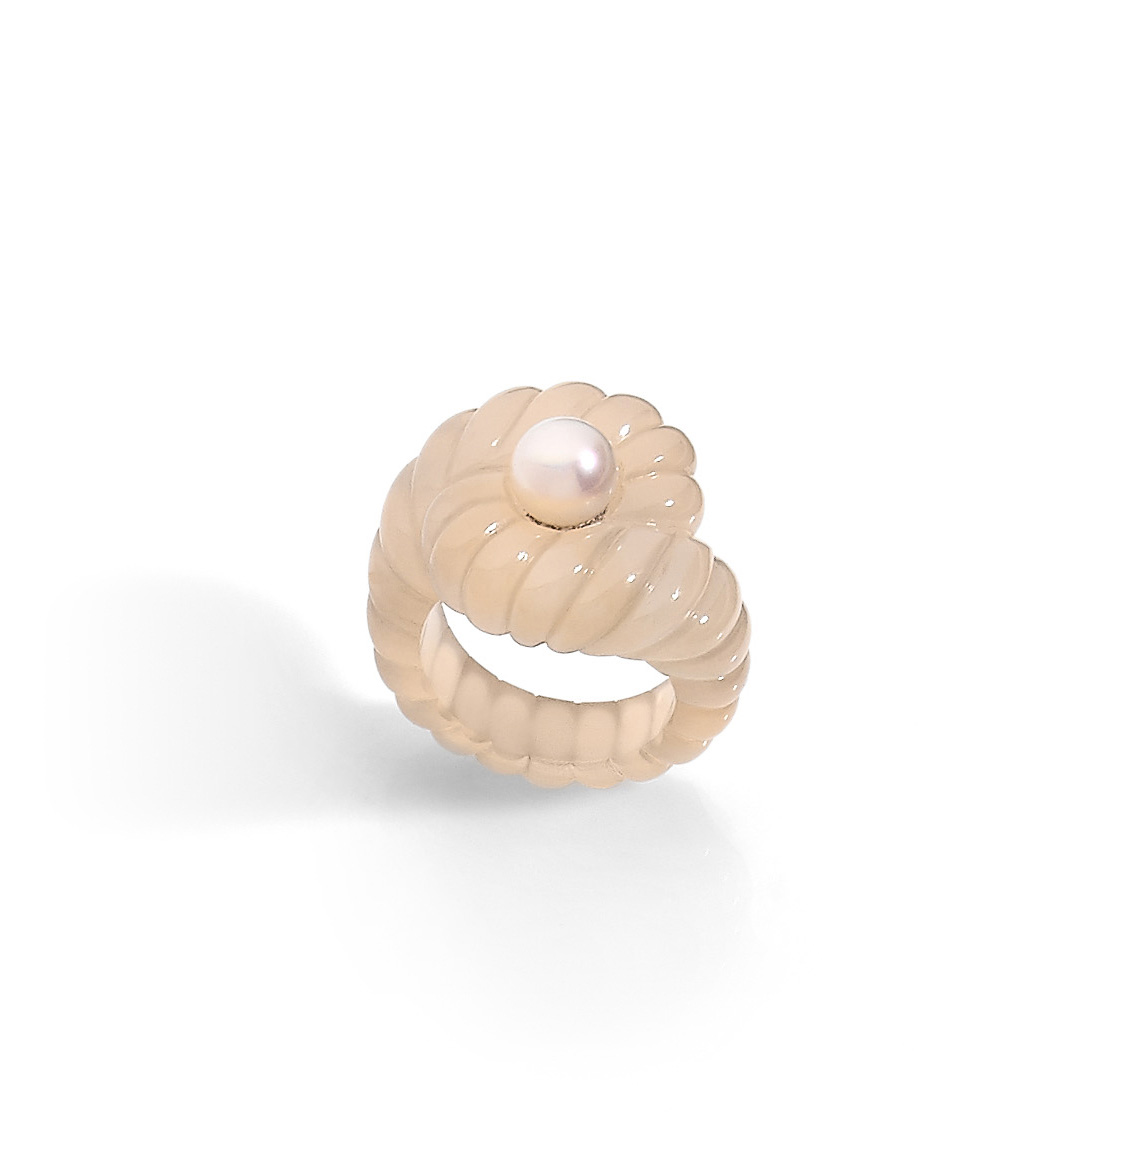 €12,800Suzanne Belperron (1900-1983), chalcedony ring engraved with gadroons and swirl decoration, set with a cultured pearl, c. 1937, 8.7